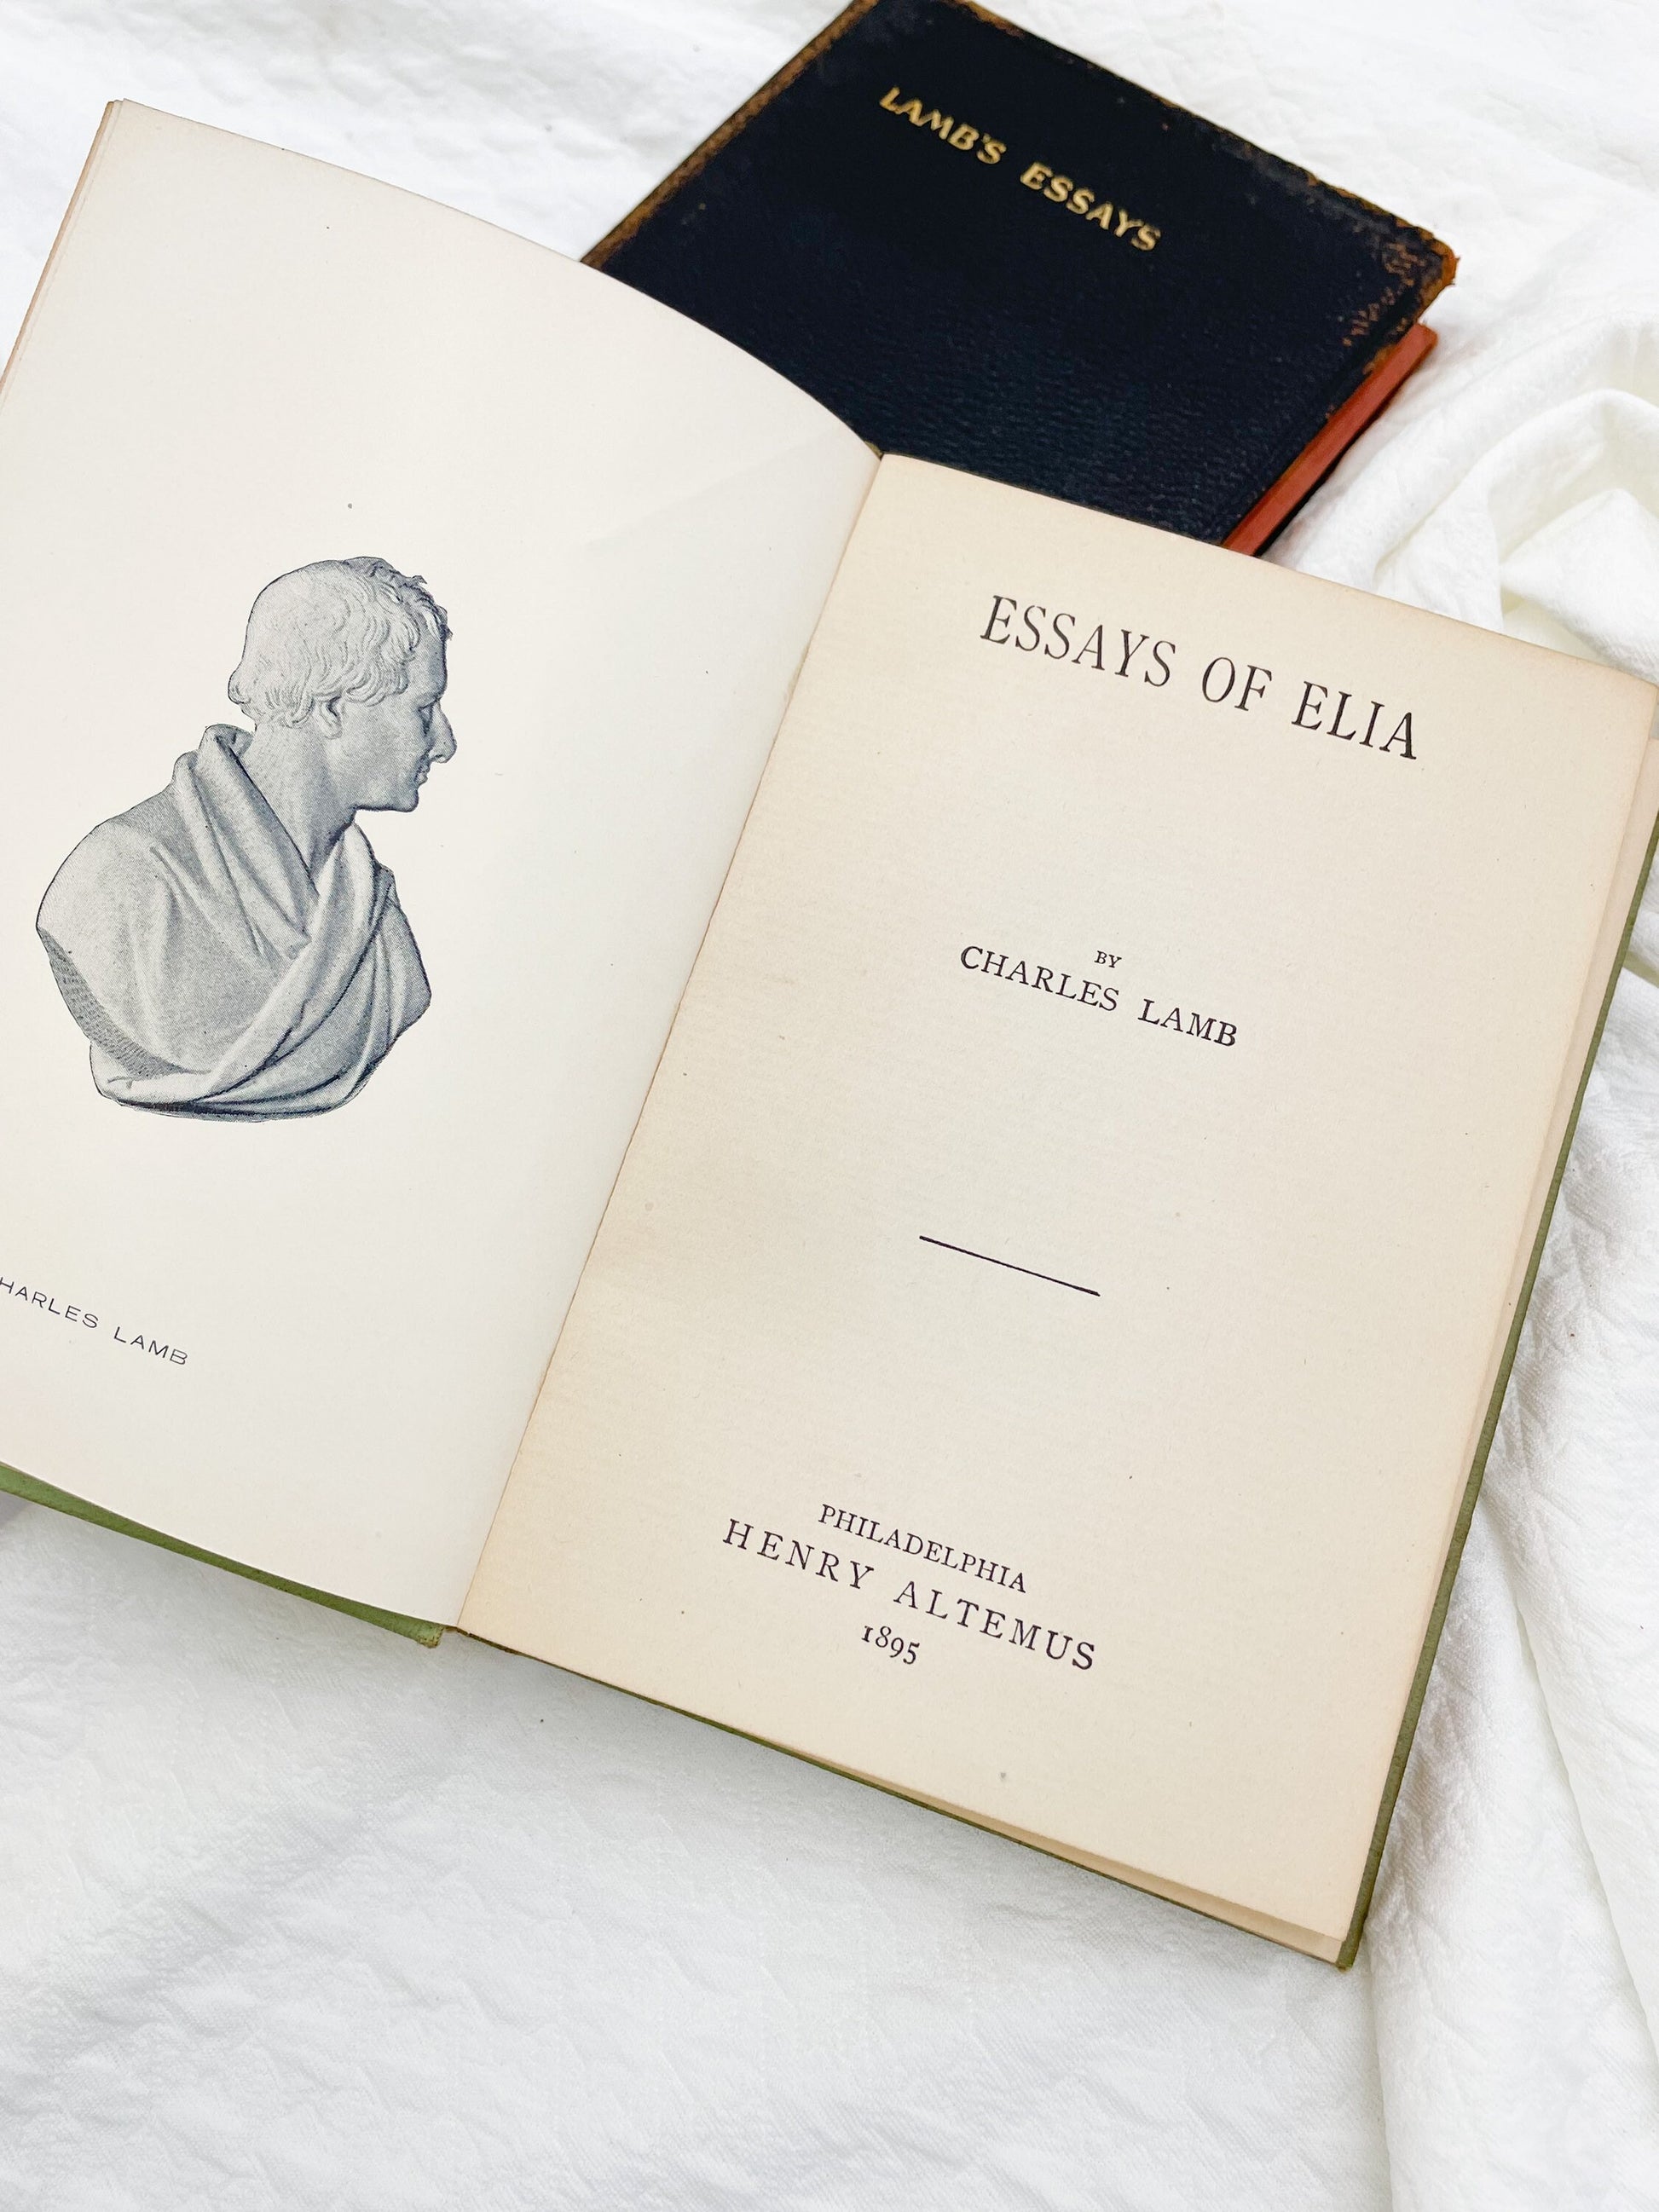 Set of 2 Vintage Books, The Lamb's Essays and The Essays of Elia by Charles Lamb